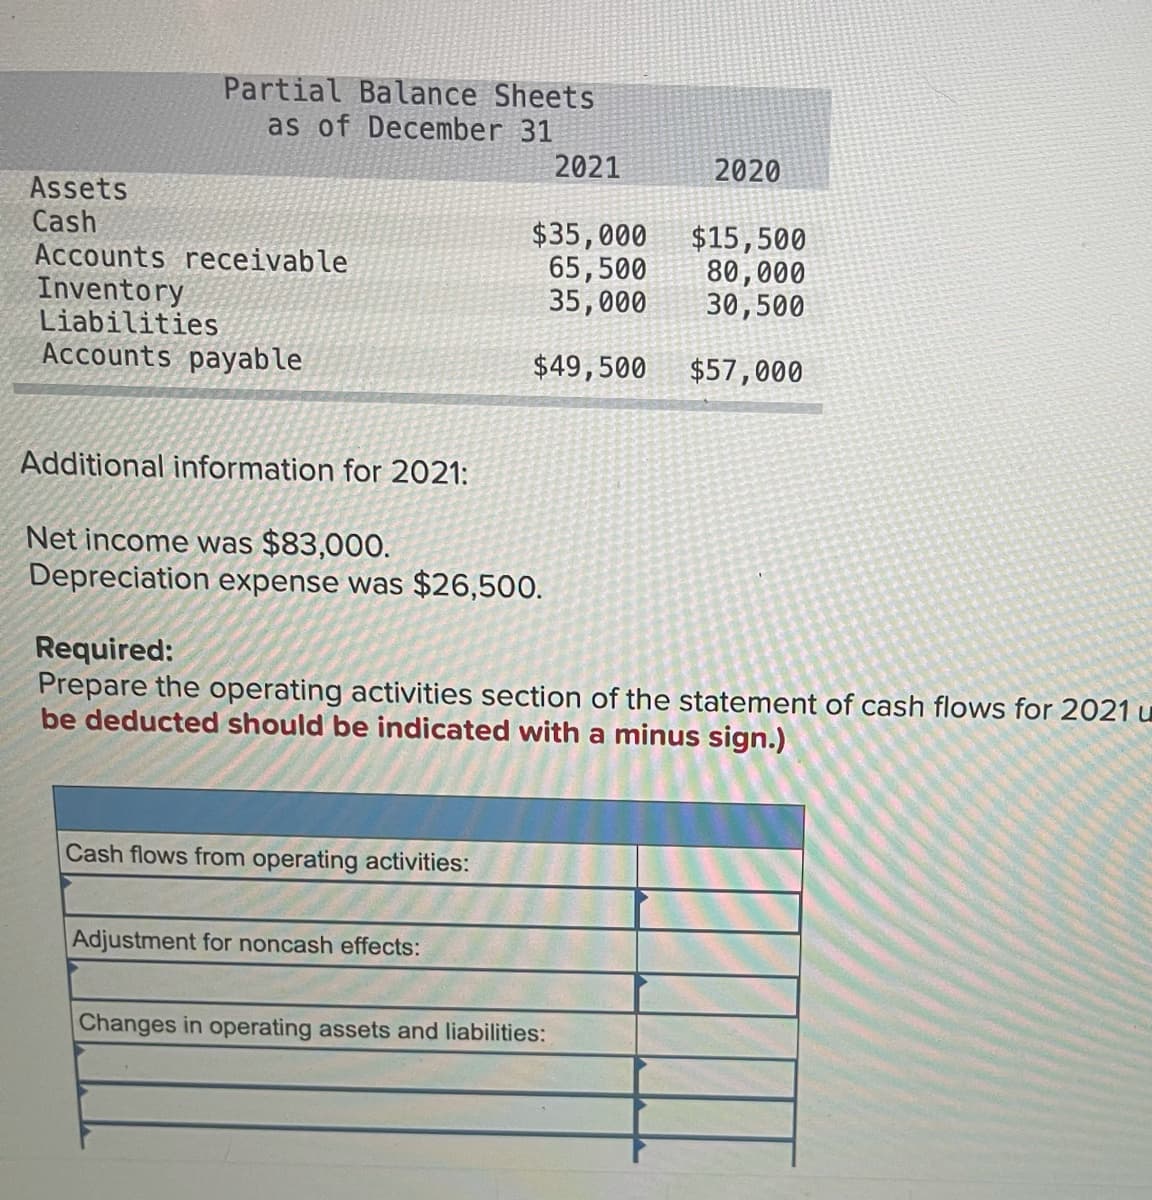 Partial Balance Sheets
as of December 31
2021
2020
Assets
Cash
Accounts receivable
Inventory
Liabilities
Accounts payable
$35,000 $15,500
65,500
35,000
80,000
30,500
$49,500
$57,000
Additional information for 2021:
Net income was $83,000.
Depreciation expense was $26,500.
Required:
Prepare the operating activities section of the statement of cash flows for 2021 u
be deducted should be indicated with a minus sign.)
Cash flows from operating activities:
Adjustment for noncash effects:
Changes in operating assets and liabilities:
